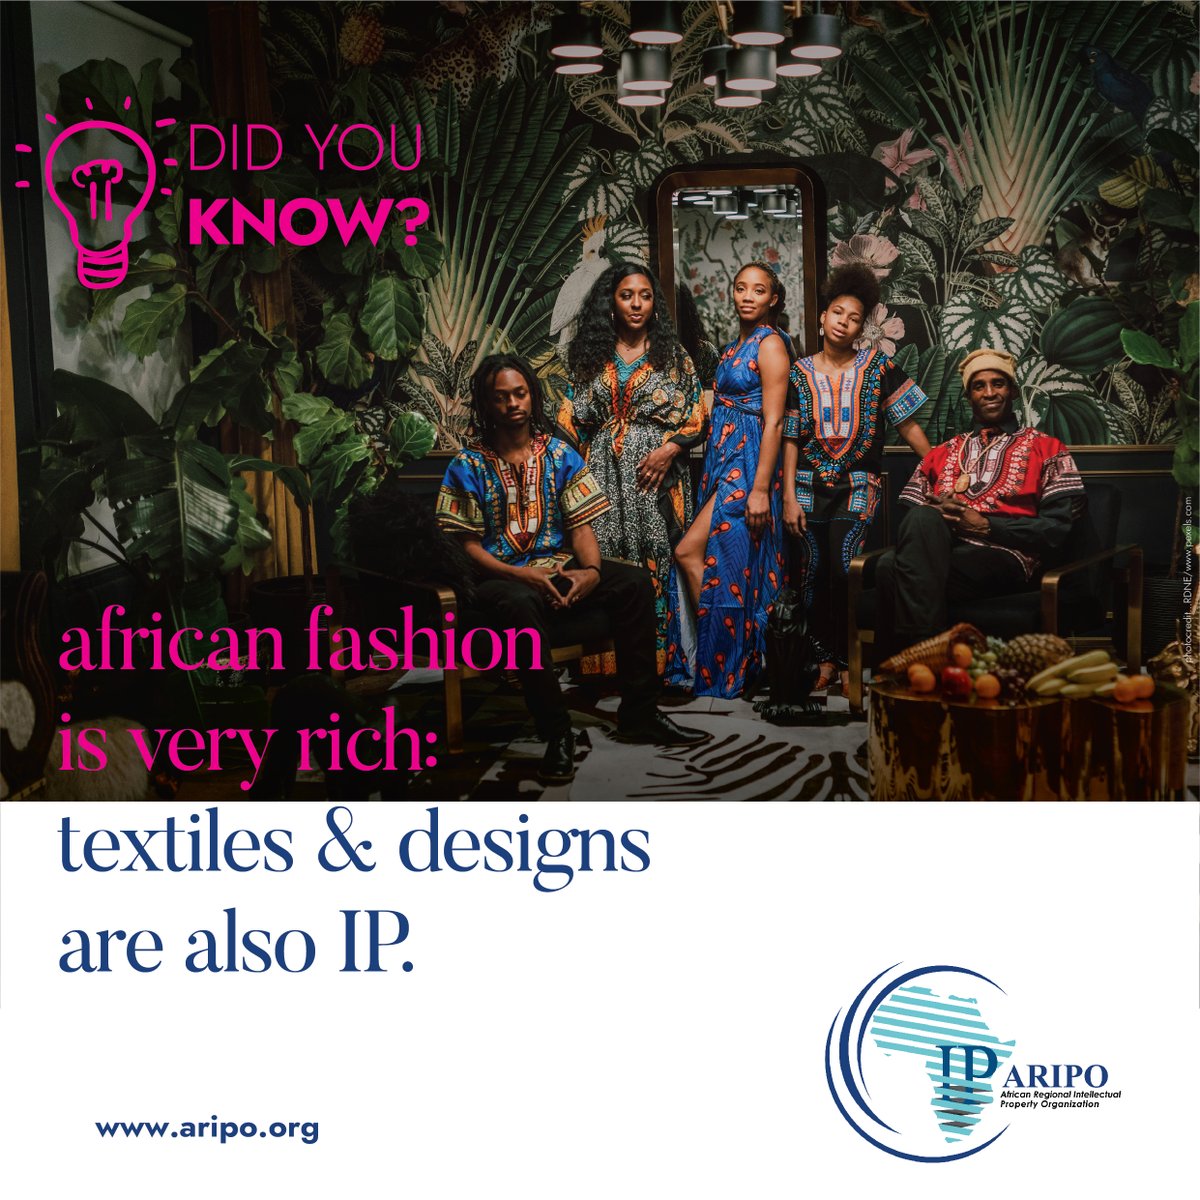 We celebrate the originality in #fashion! Original designs in fashion can be recognized as #intellectualproperty through: ✅ #copyright protection for artistic elements, ✅#designpatents for ornamental features, and ✅#trademarks for brand identification and differentiation.